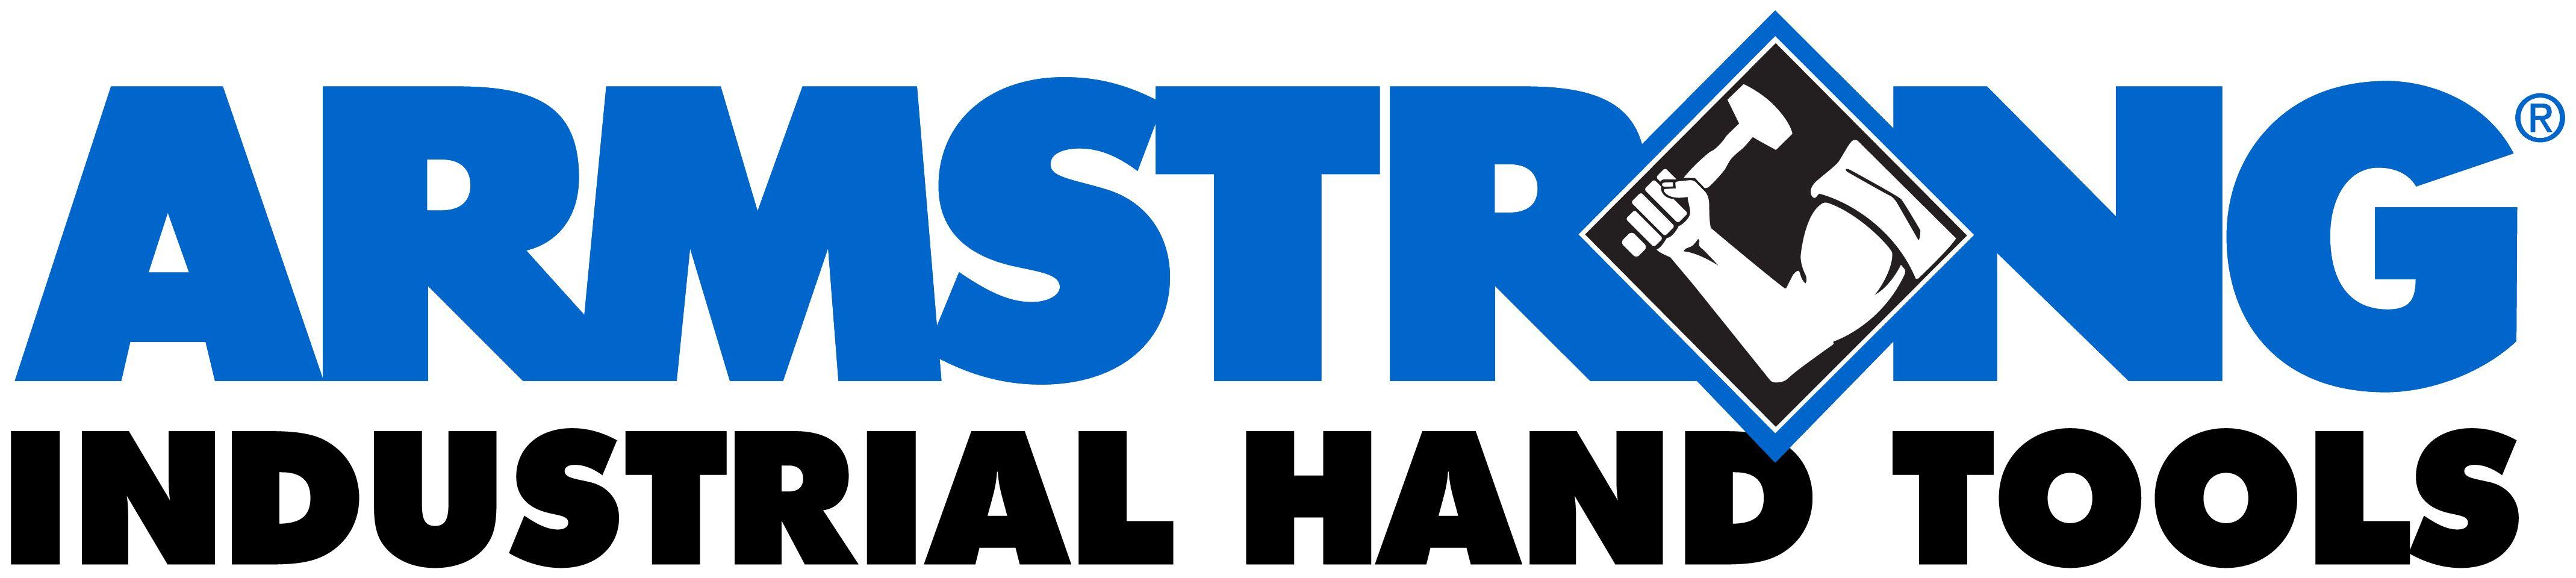 Armstrong Logo - Armstrong Industrial Hand Tools